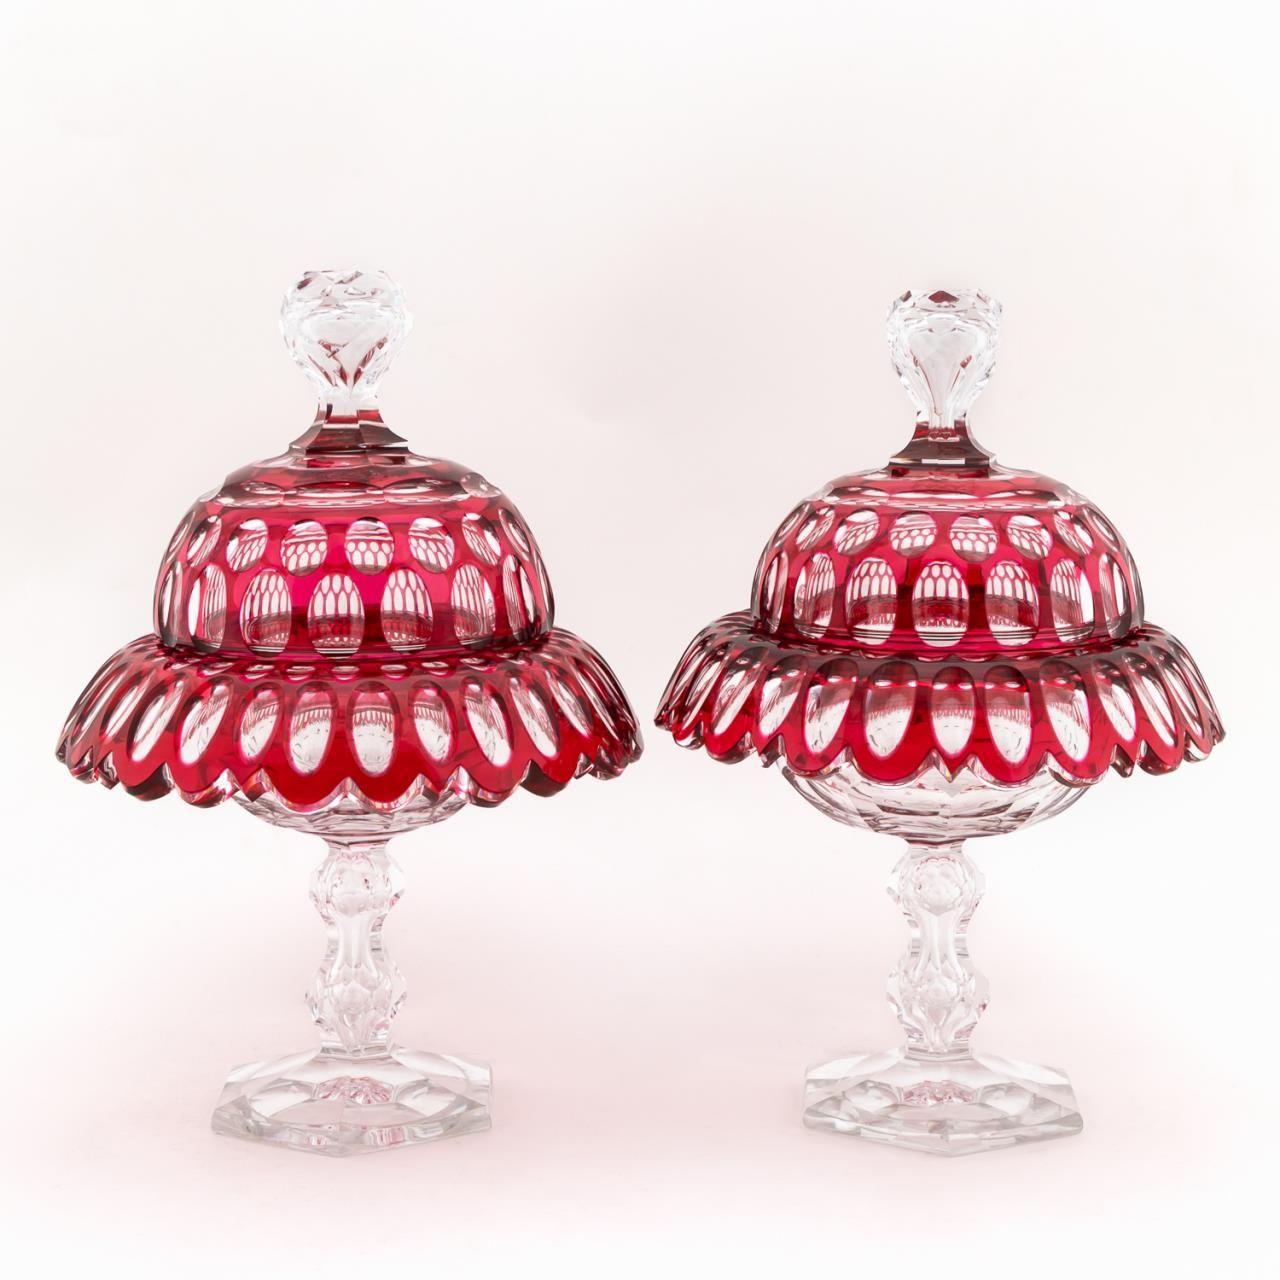 Bohemian, late 19th / early 20th century. Pair of cut to clear ruby lidded compotes in thumbprint pattern with a faceted finial on domed lid, flared and ruffled rim, and ending on a hexagonal foot. Unmarked. 
Approx. h. 11.25